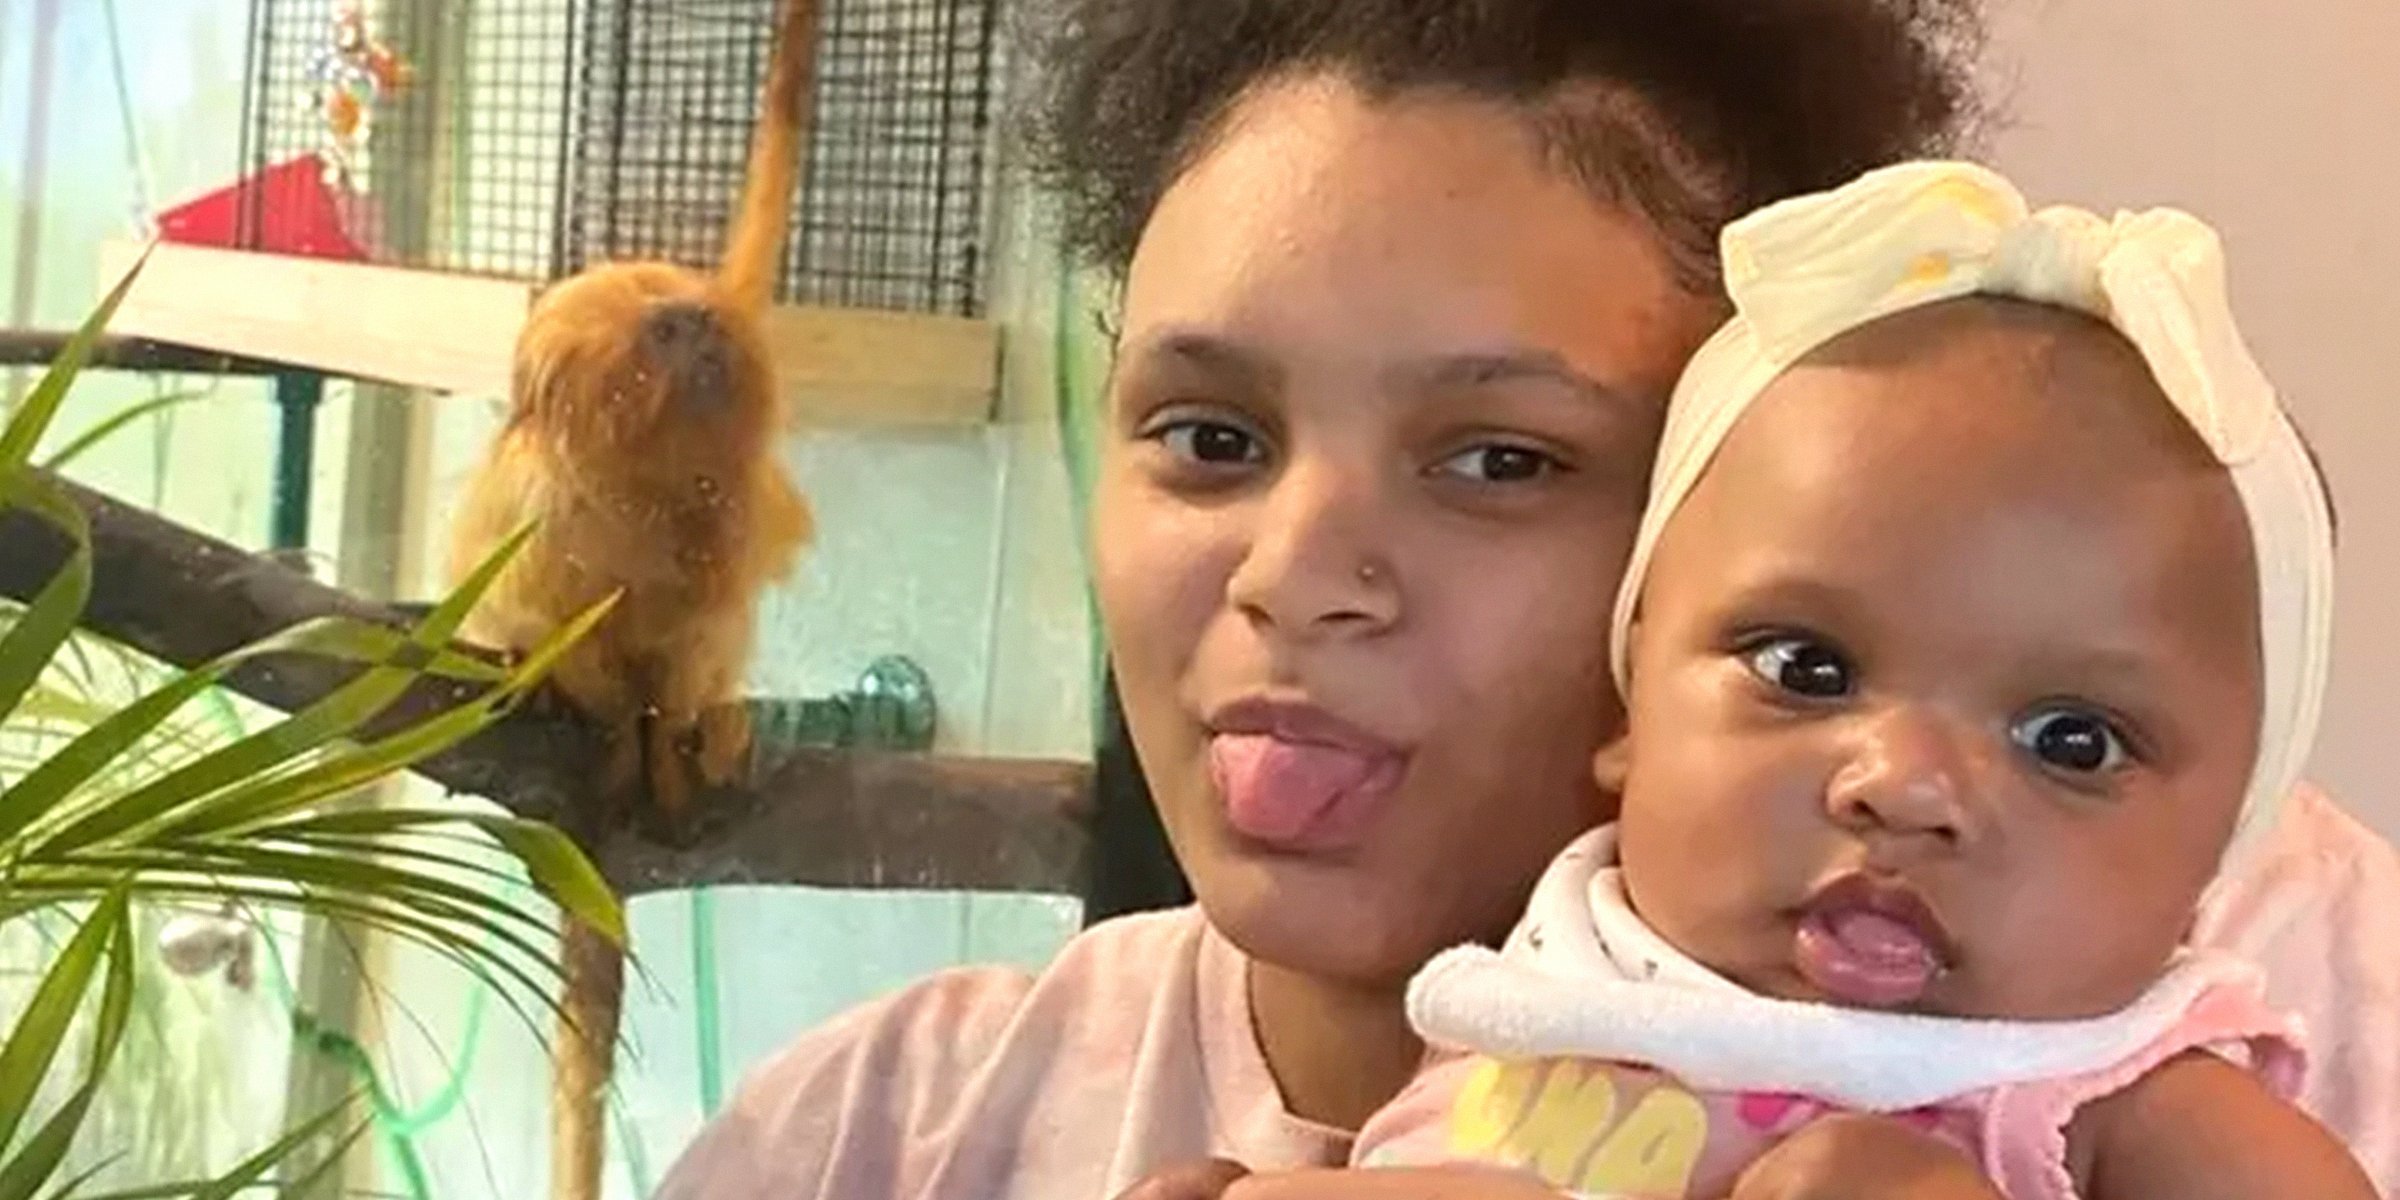 Saniah Moore and Her Daughter | Source: Gofundme.com